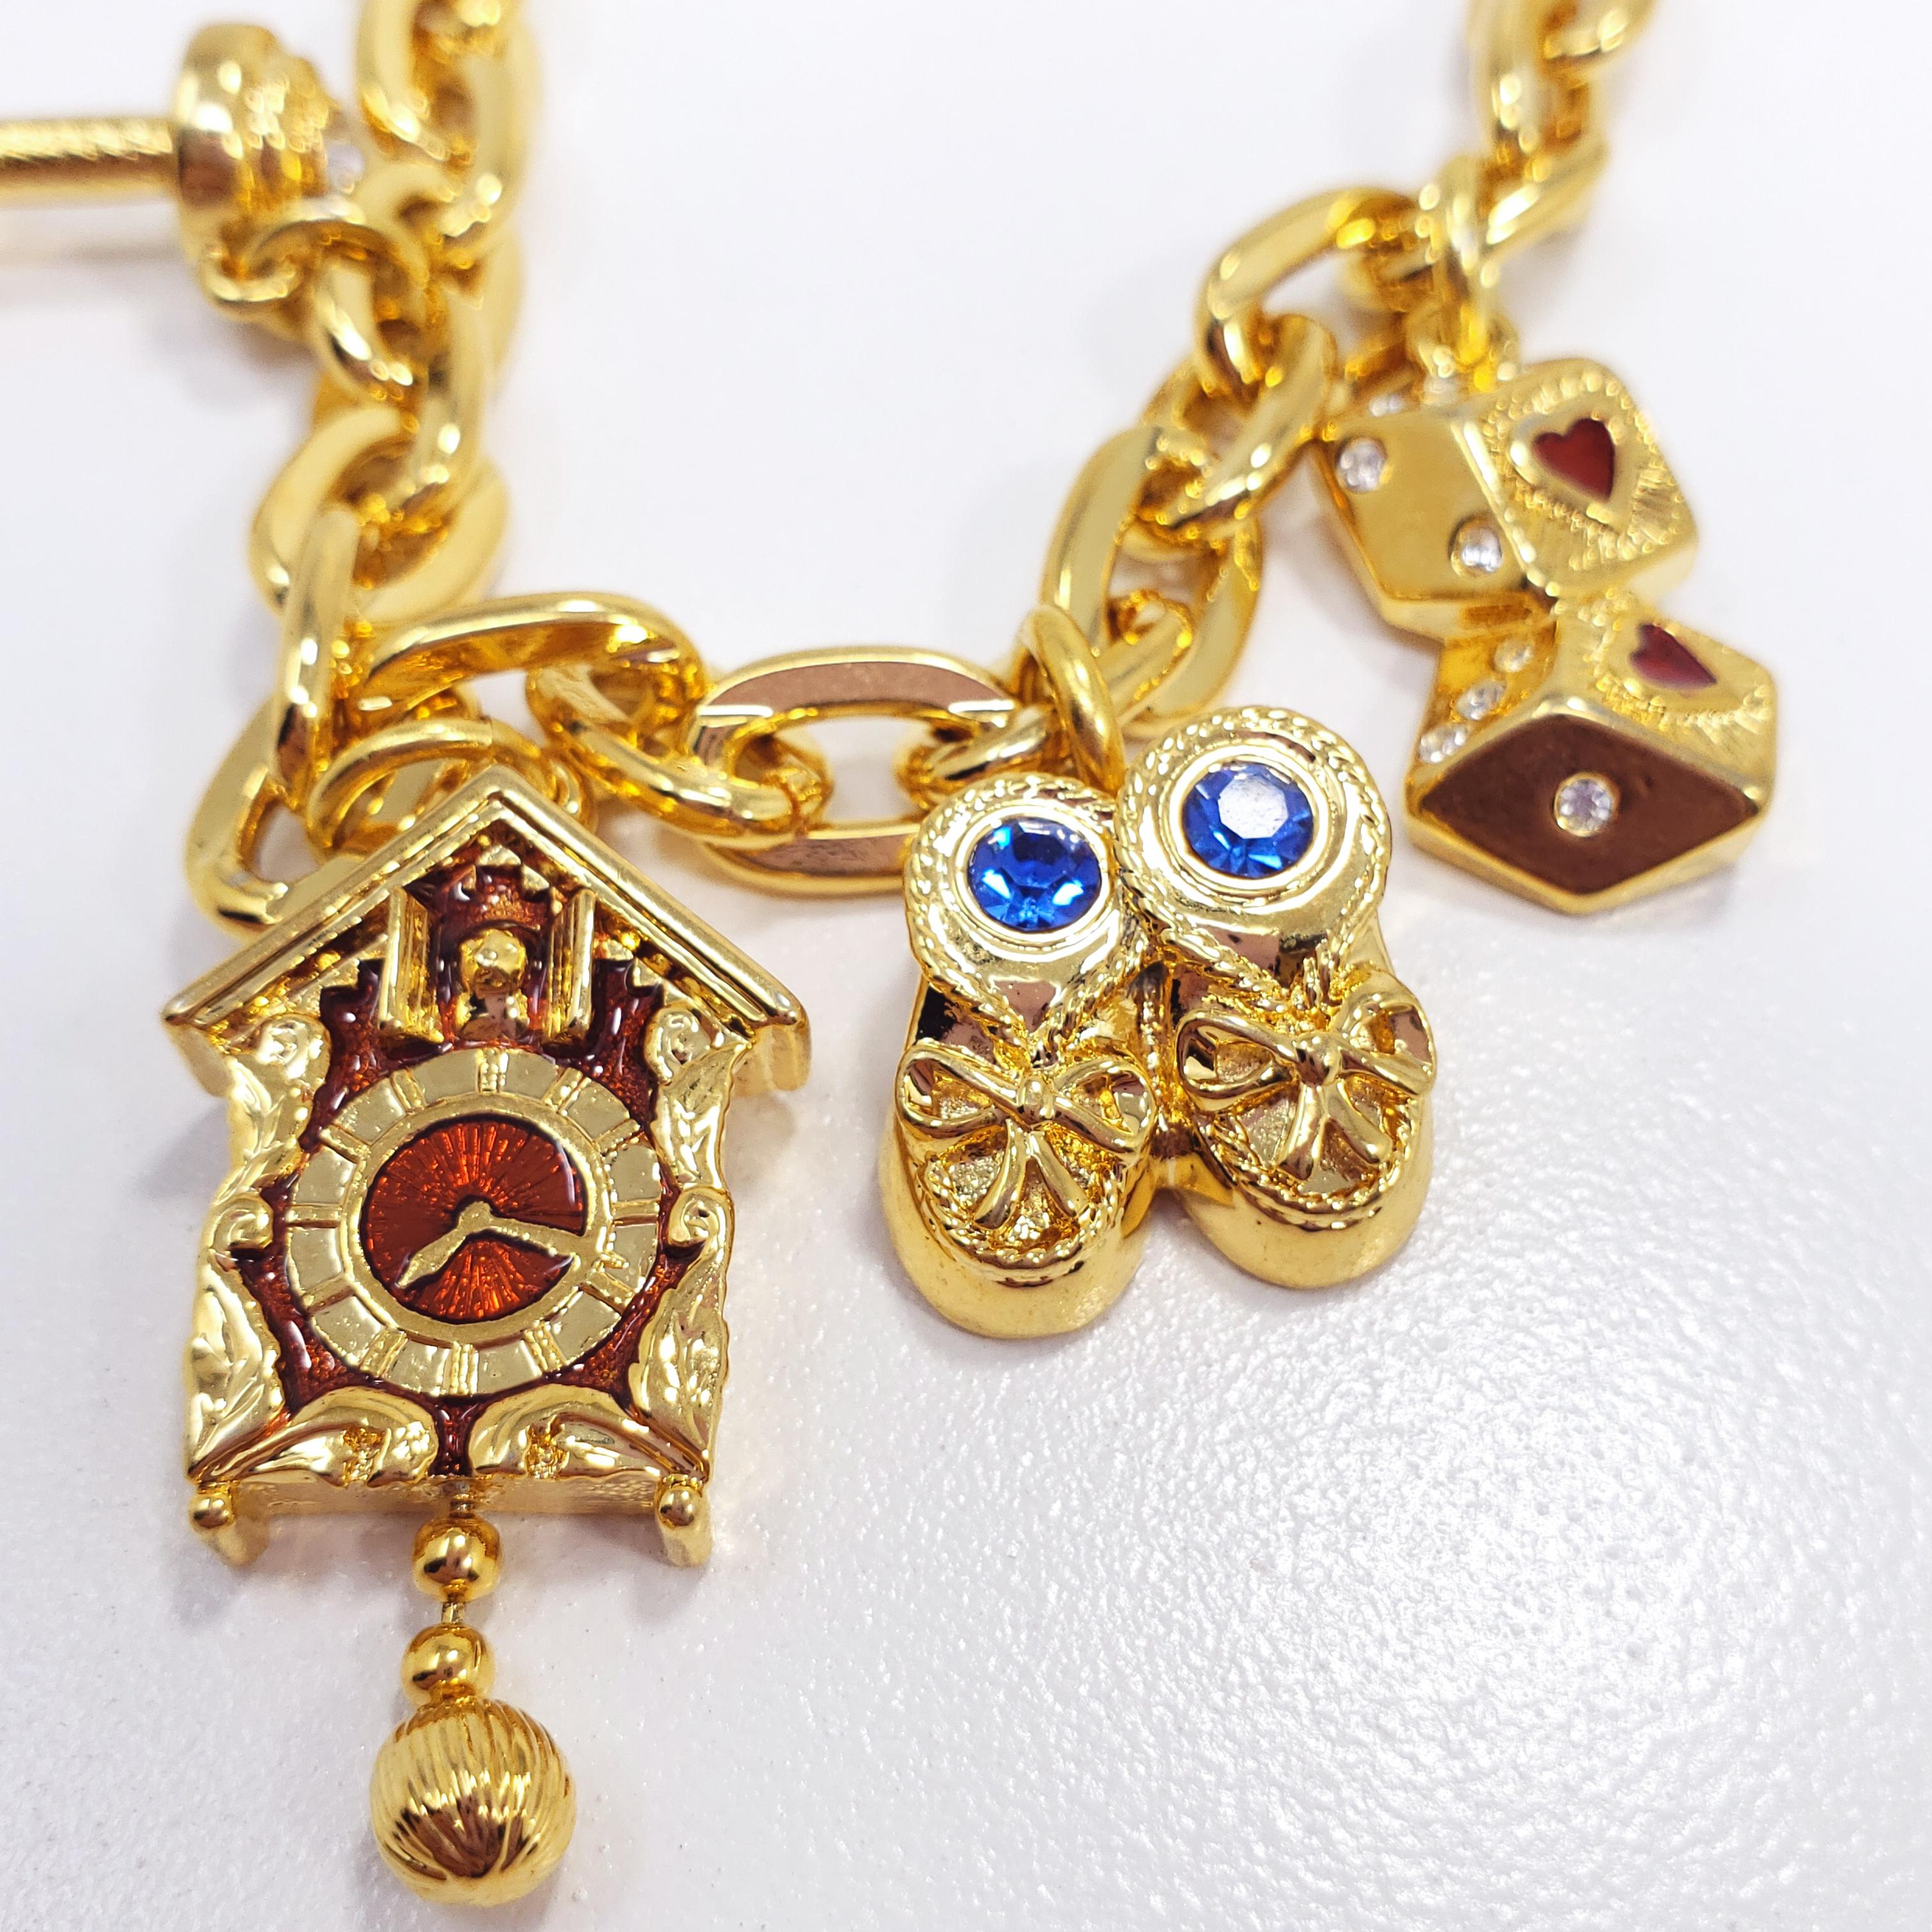 A gold-plated chain bracelet with five charms - a pair of lucky dice, shoes, a cuckoo clock, a dumbbell, and MO' $ motif. Accented with crystals and enamel, fastened with a toggle clasp. By Kenneth Jay Lane

Hallmarks: © KJL